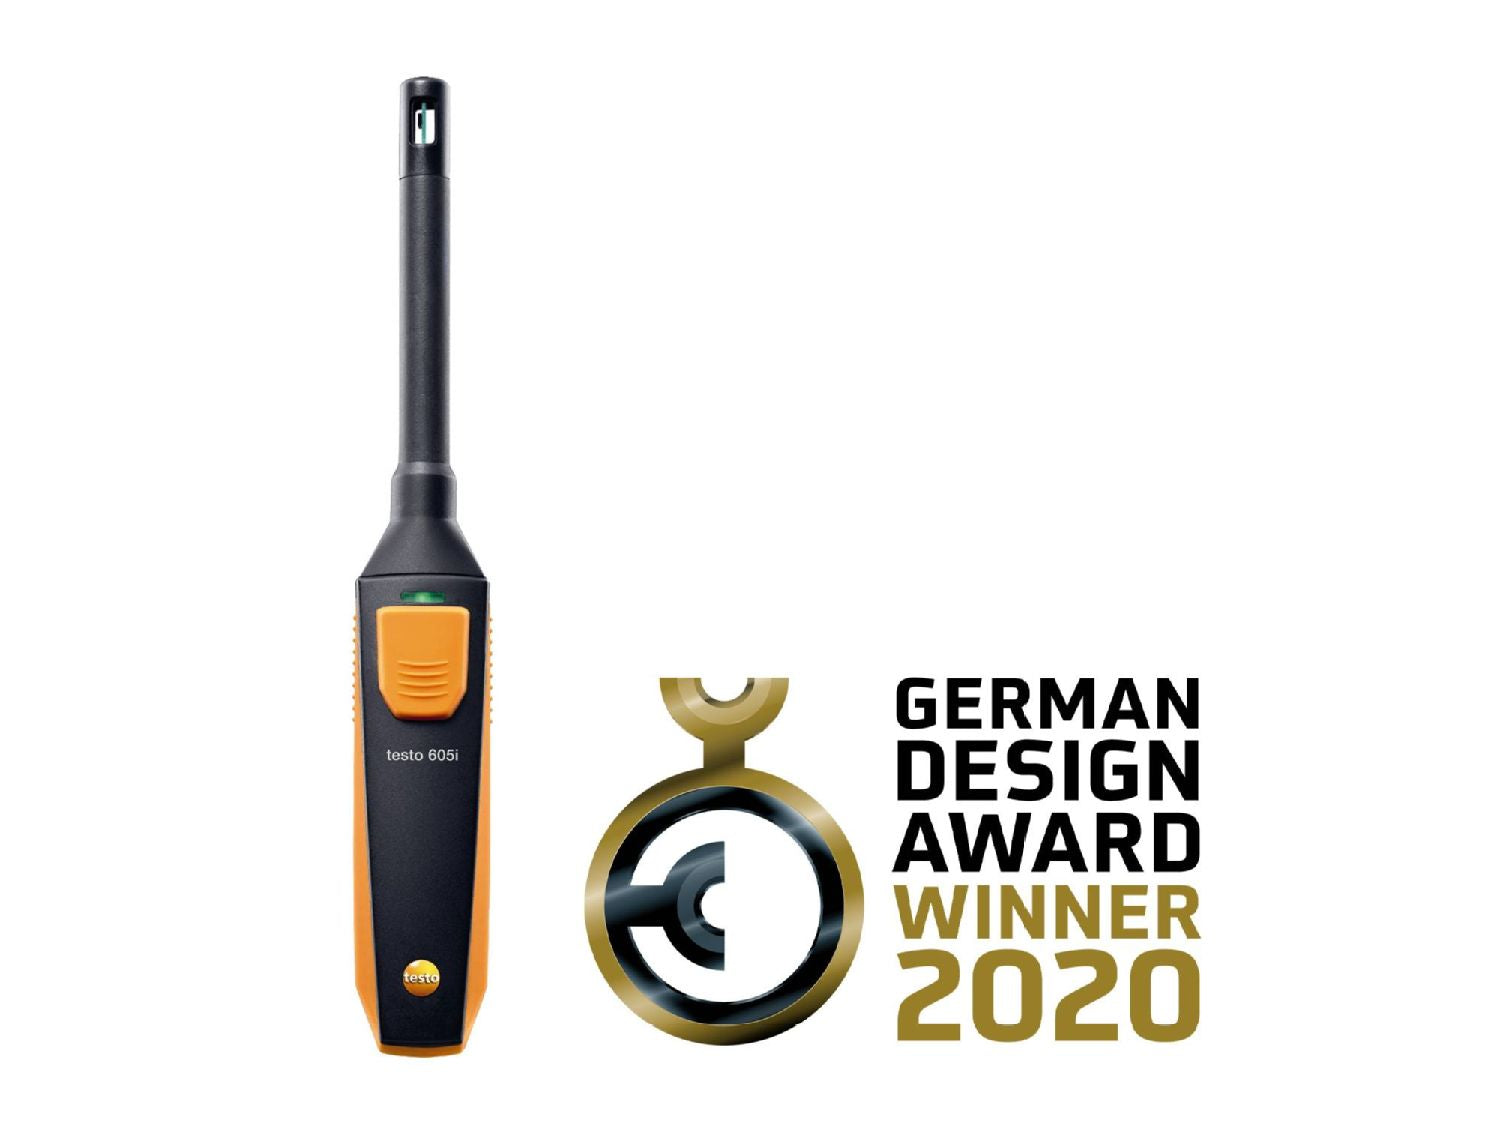 Testo 605i Gen 2 - Smart Thermohygrometer Operated With Your Smartphone 0560 2605 02 hvac shop award